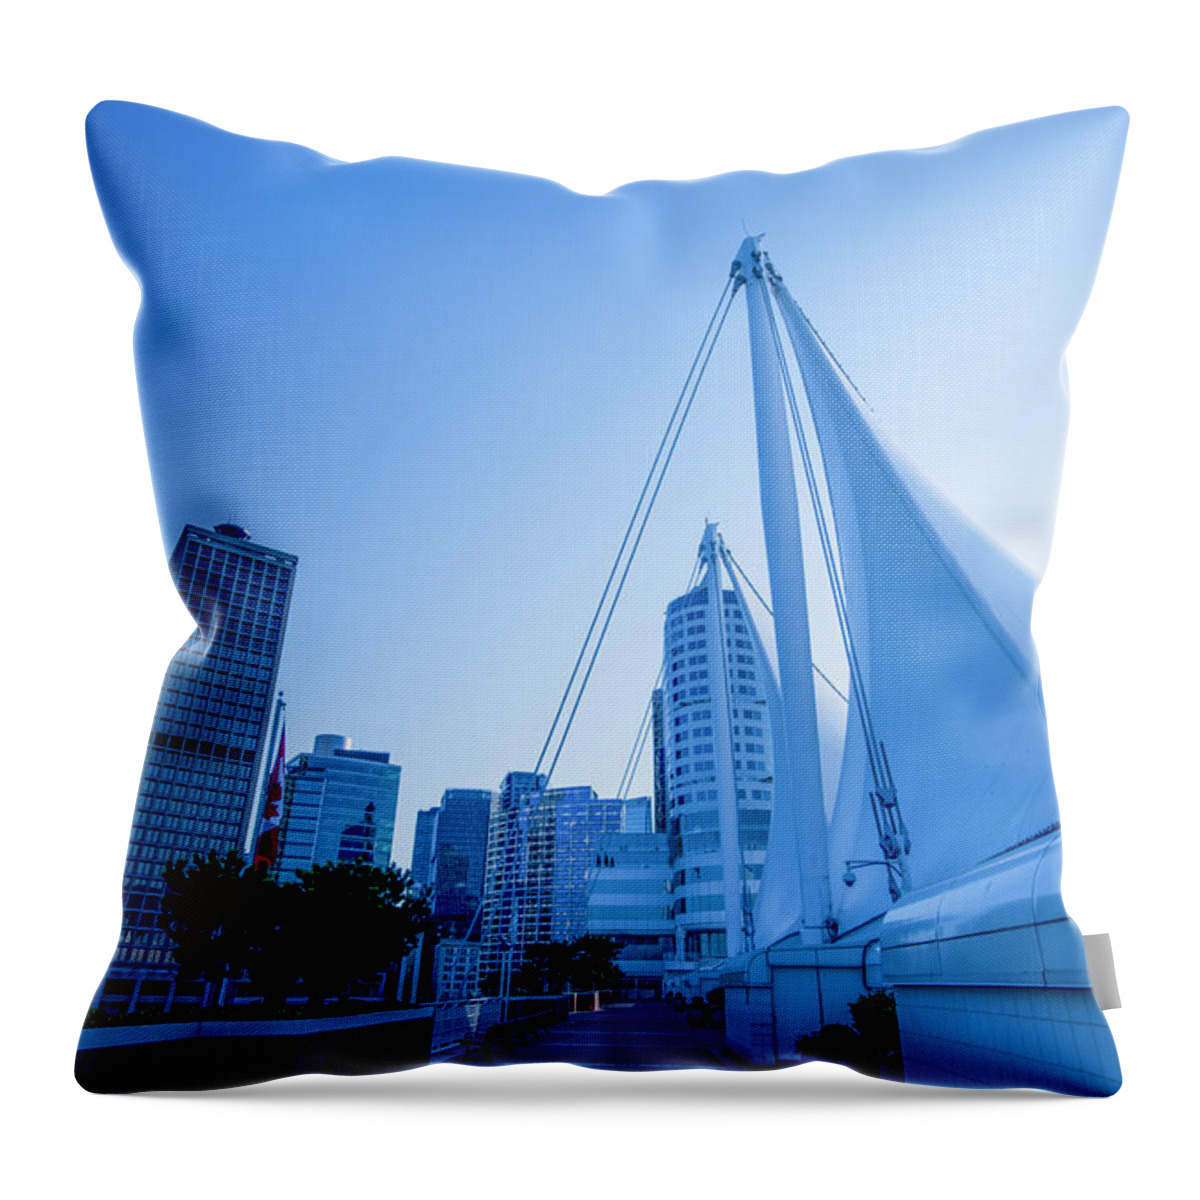 Port Of Vancouver Throw Pillow featuring the photograph 0190 Port of Vancouver Sails Waterfront by Amyn Nasser Neptune Gallery